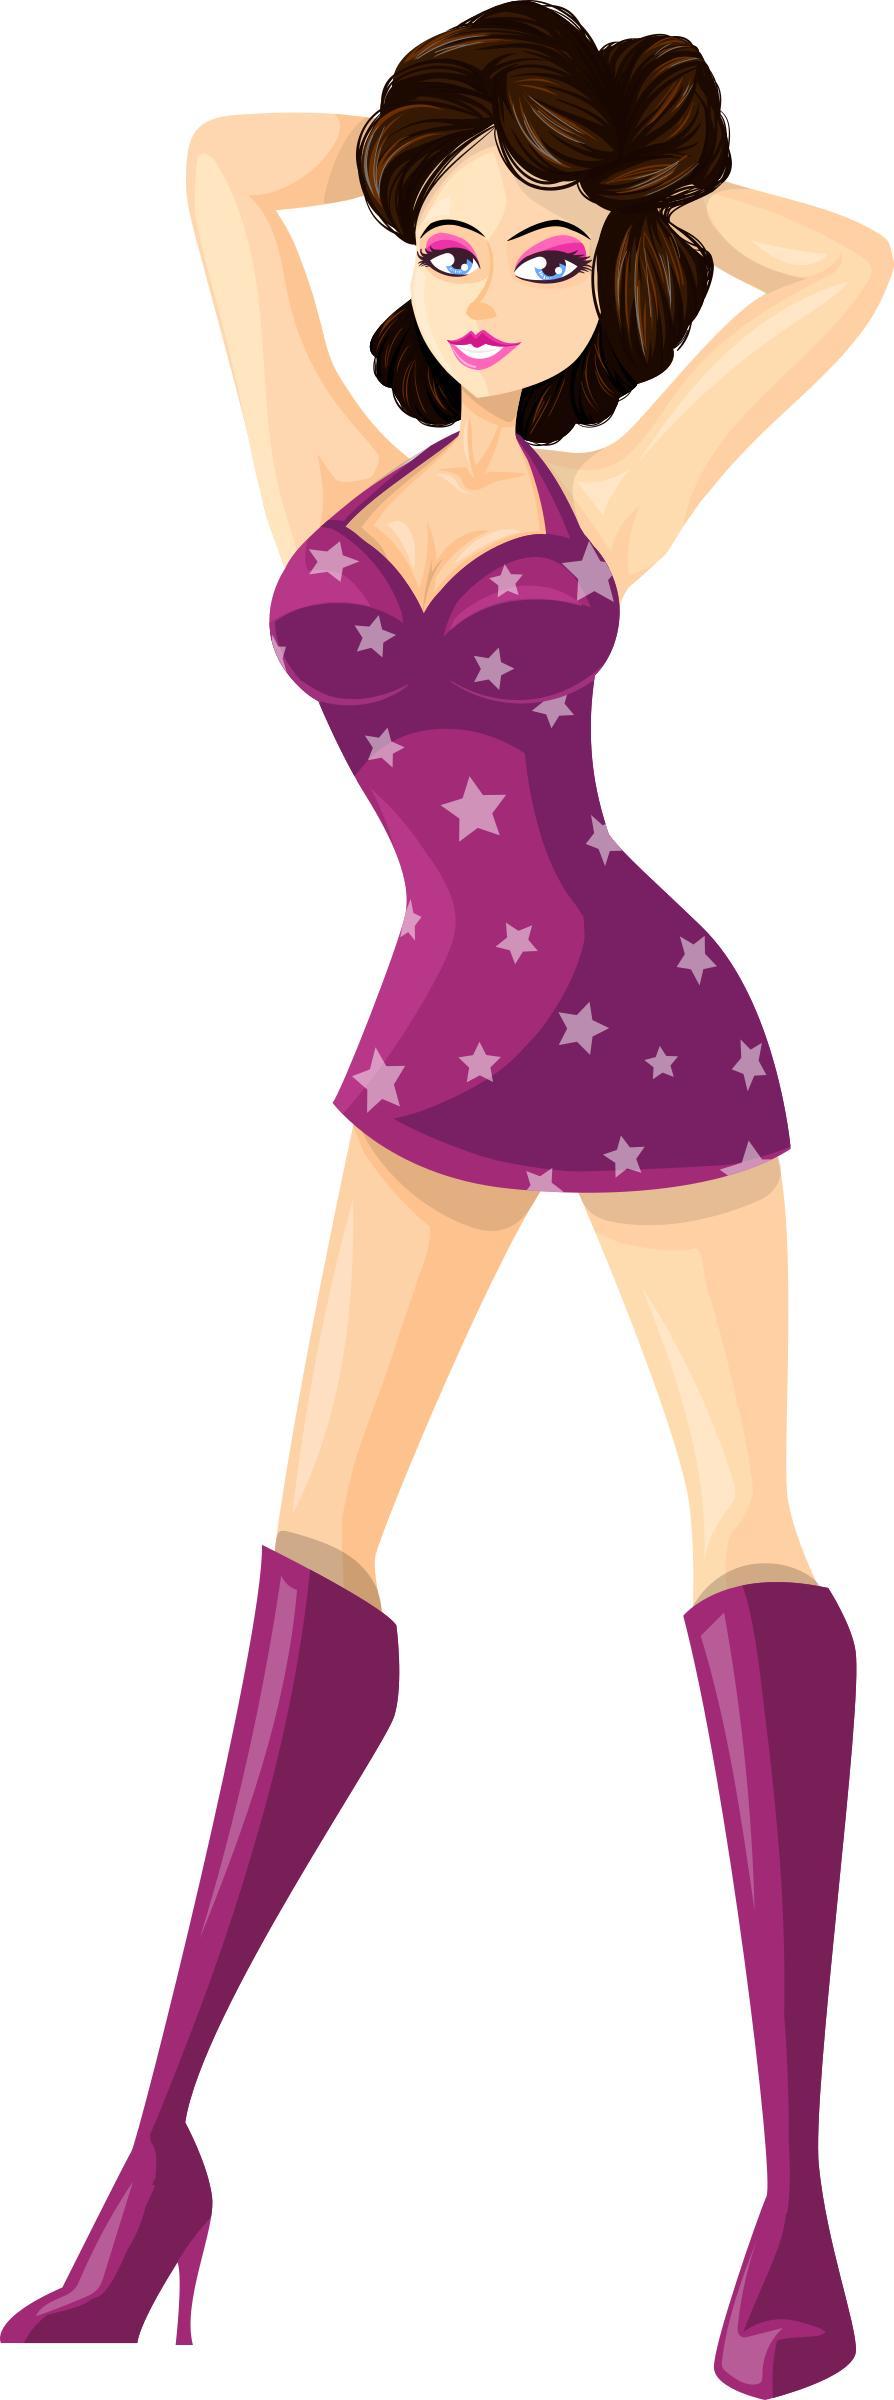 Young lady 2 (brown hair, light skin, starry dress #2) png transparent